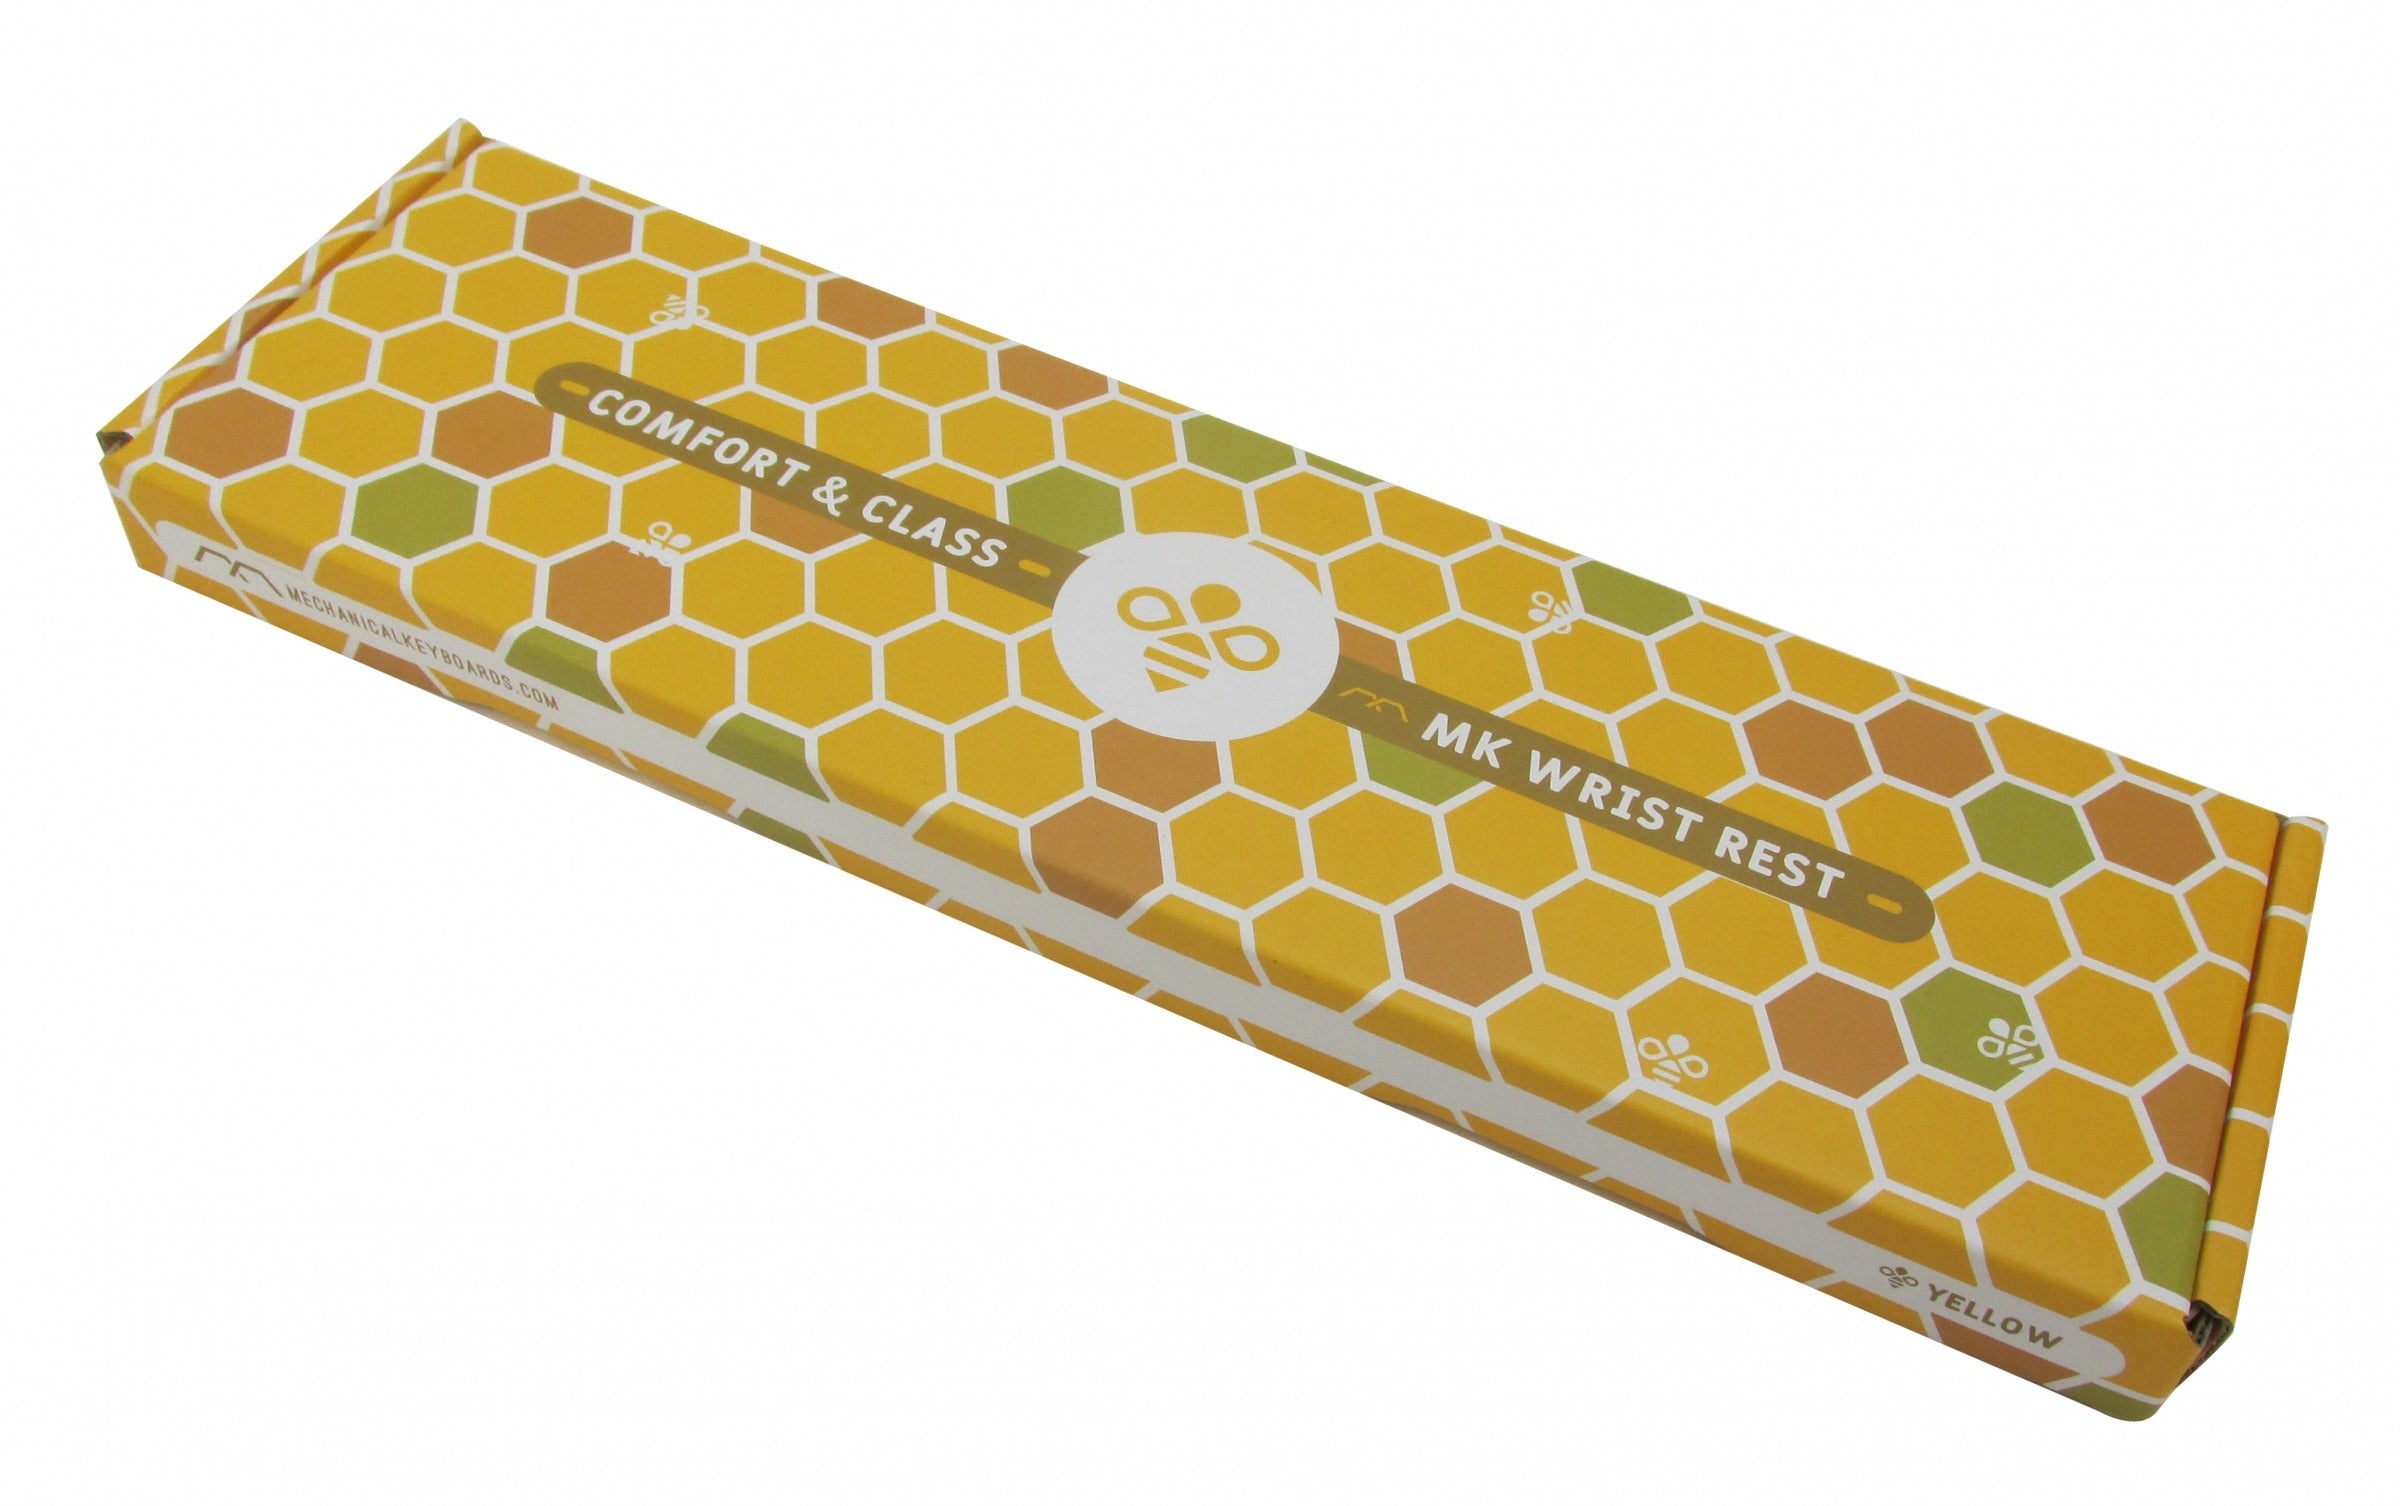 MK Honey Bee Compact 60% Wrist Rest Yellow Leather w/ Black Stitching MKWGTTRVH9 |26950|